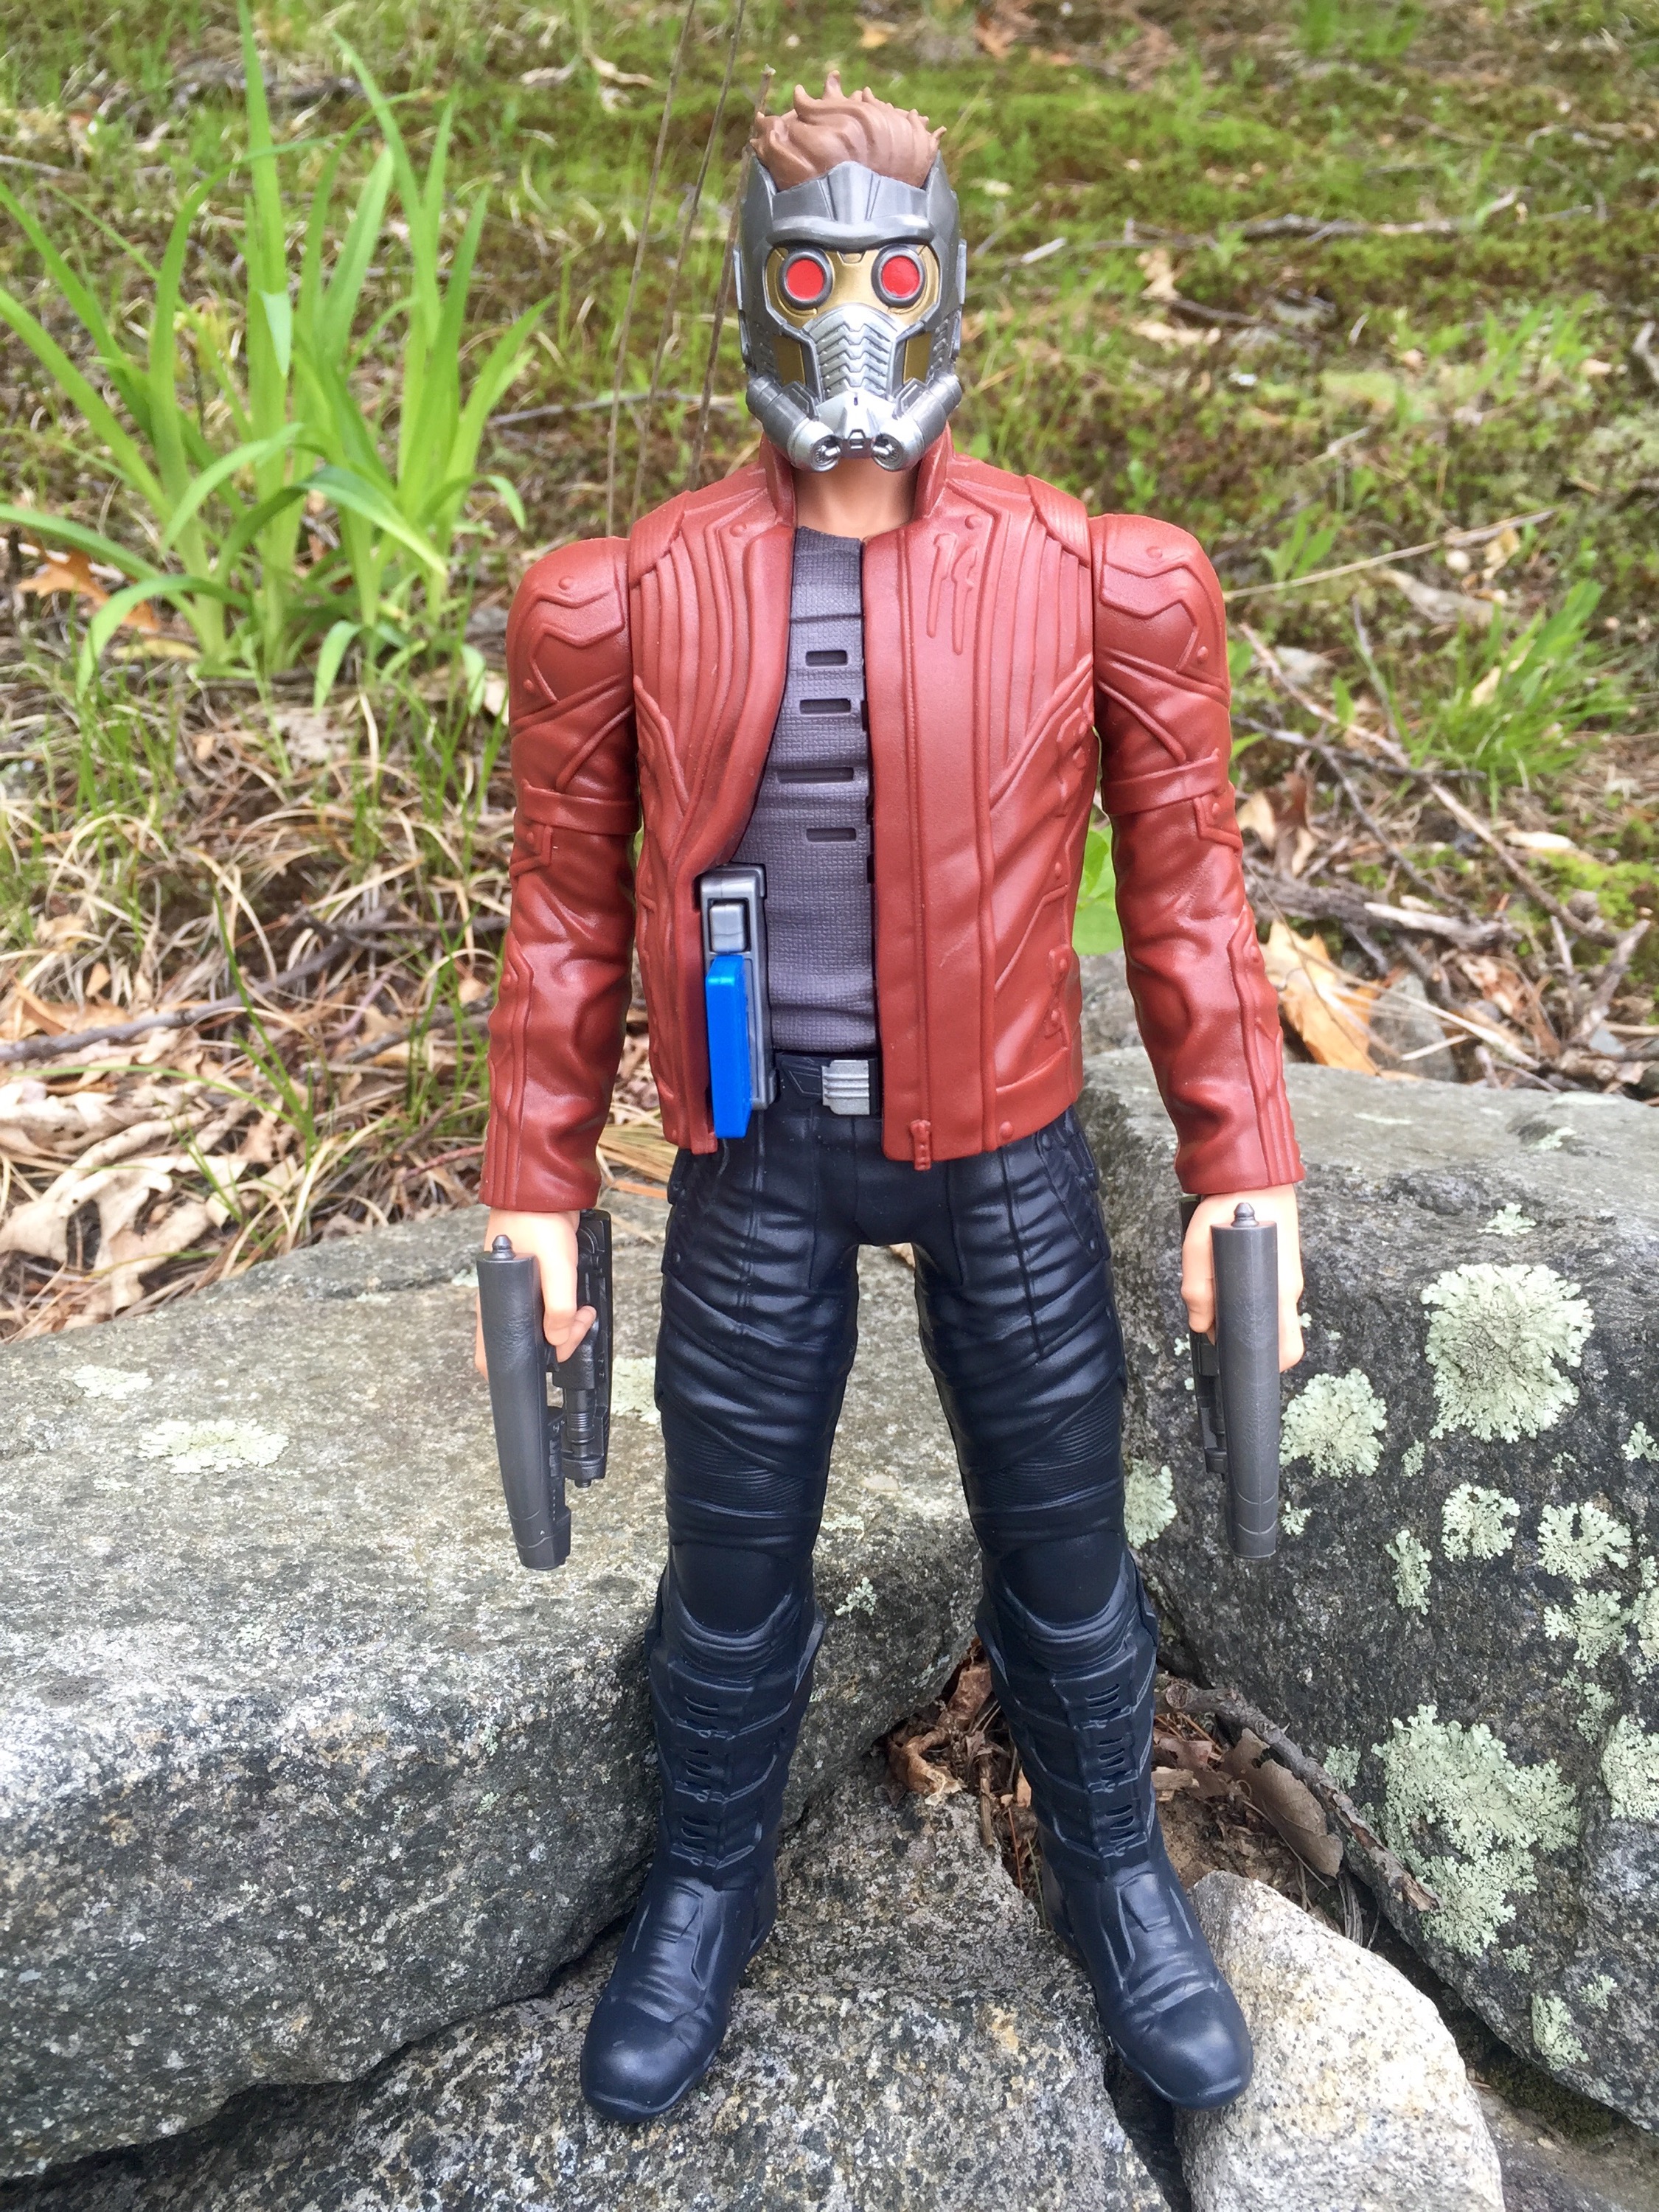 star lord 12 inch figure